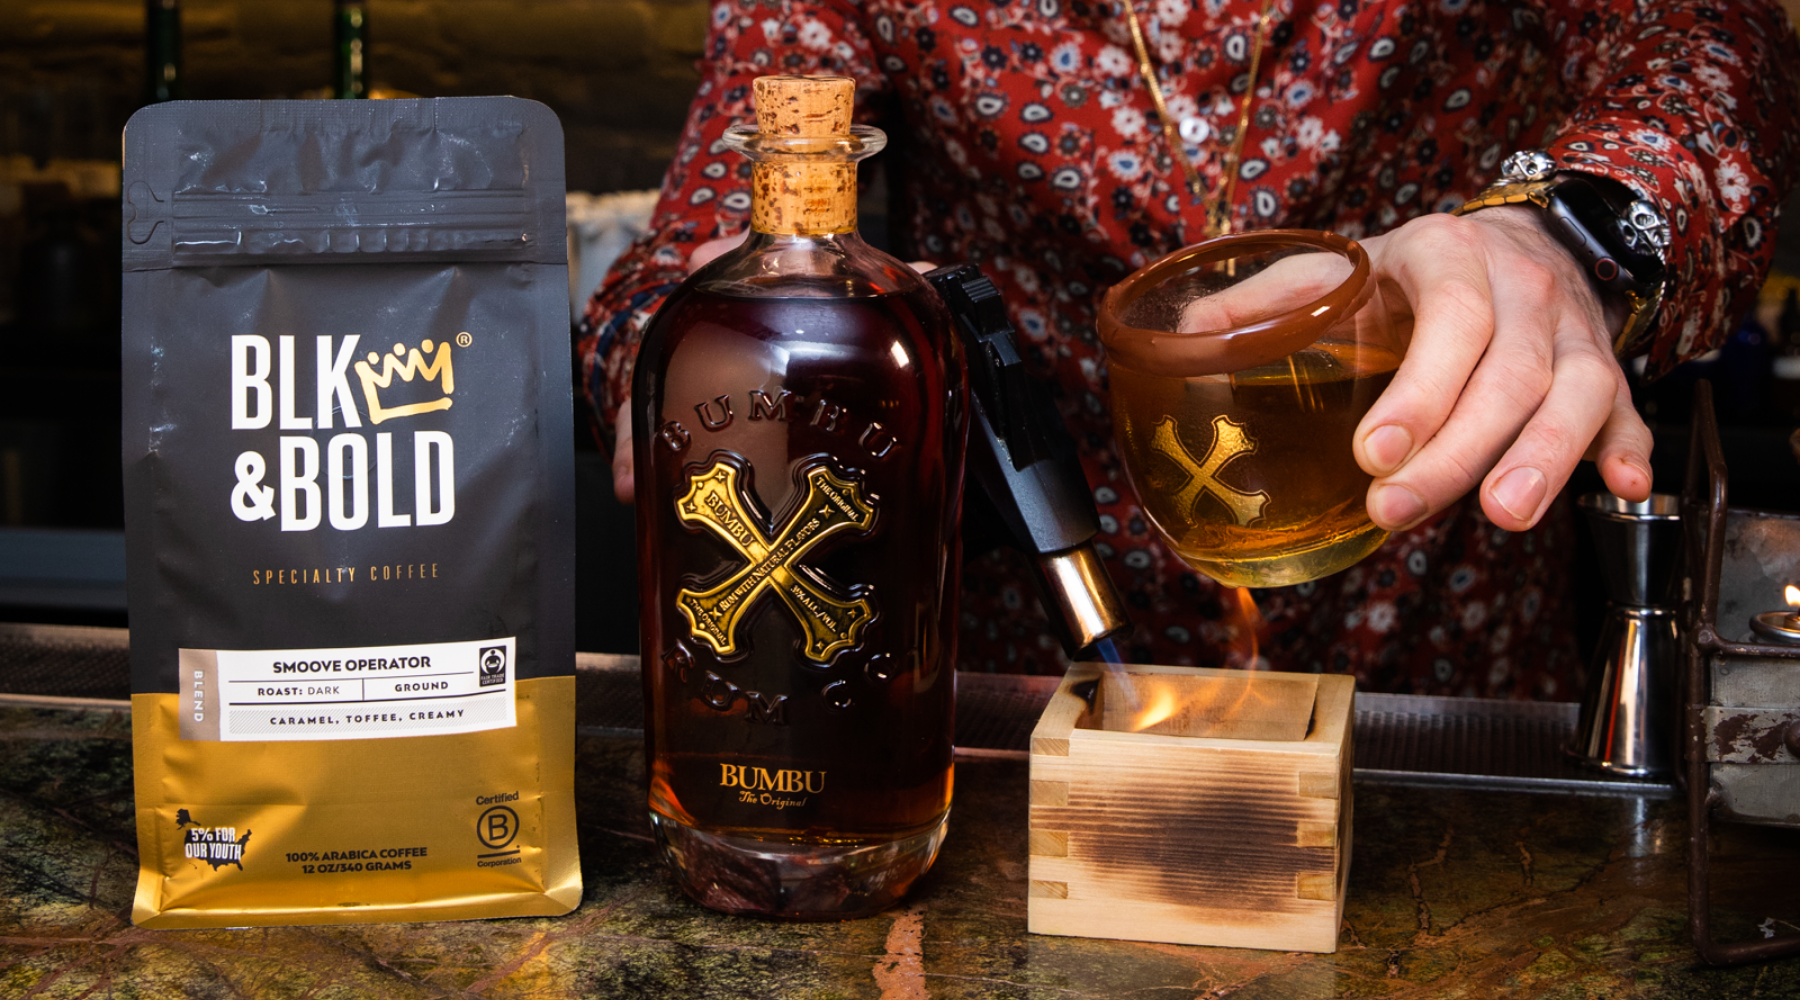 BLK & Bold Smoove Operator and Bumbu Rum Original in collaboration for National Cocktail Day